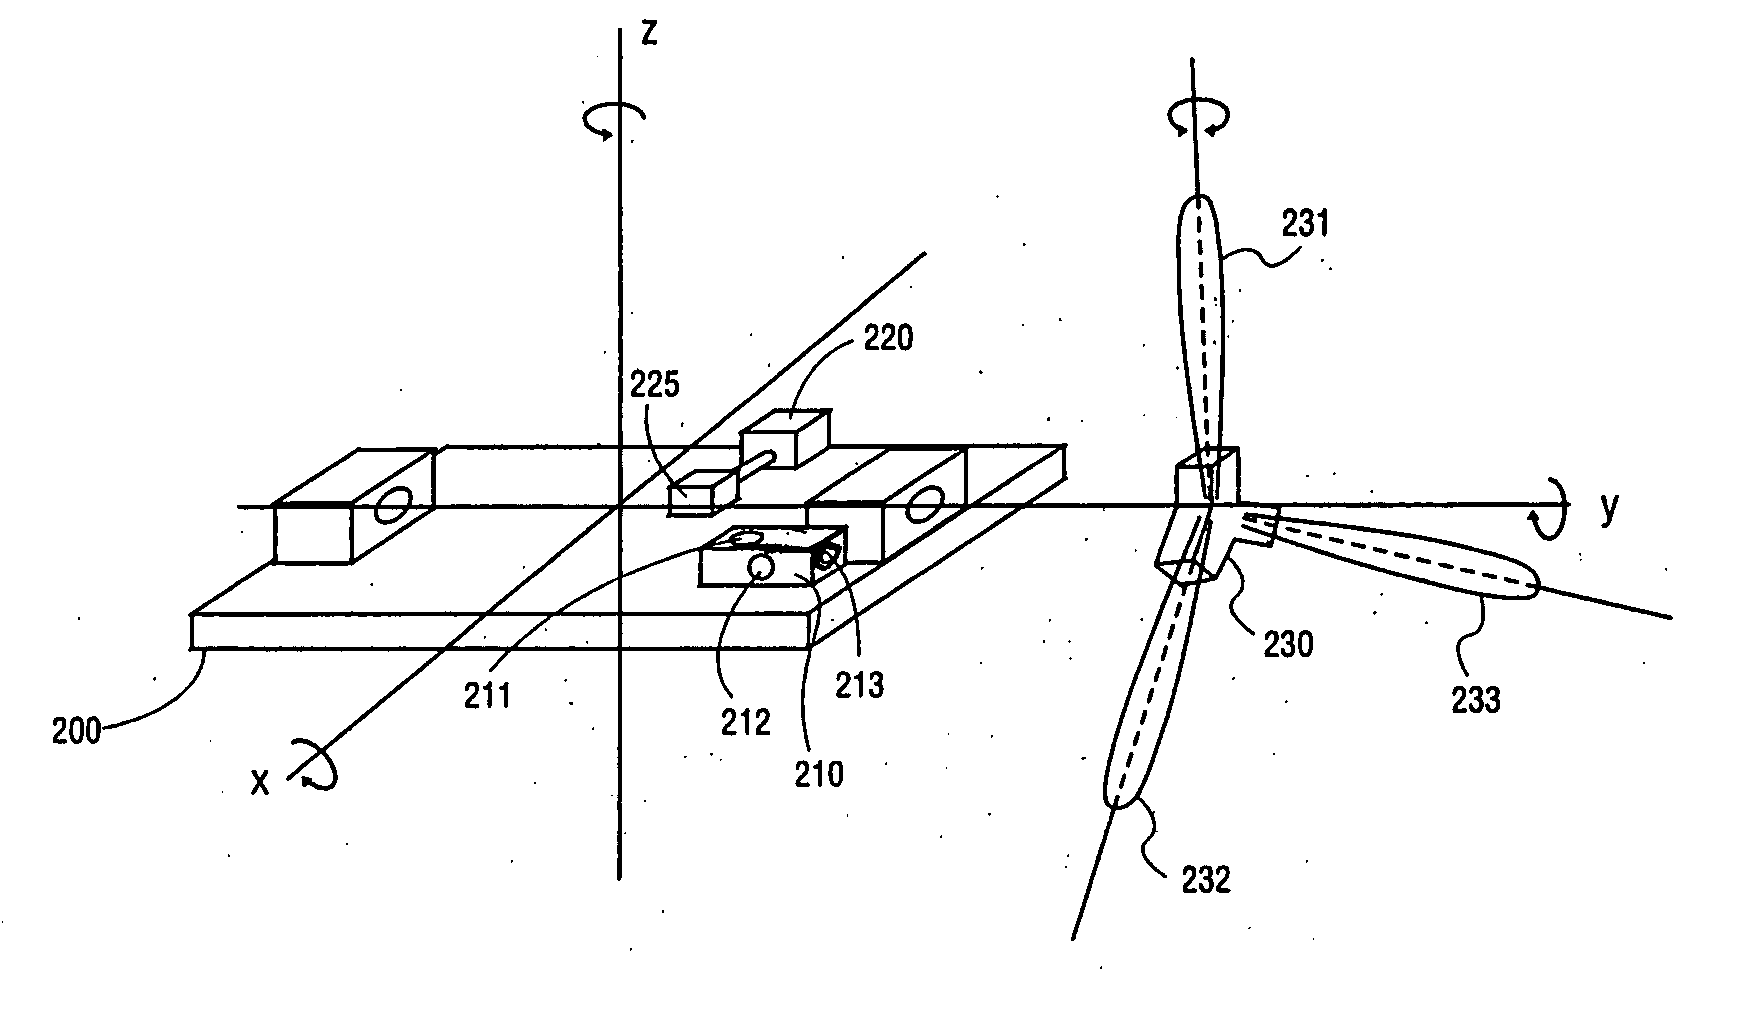 Methods and apparatuses for wind turbine fatigue load measurement and assessment